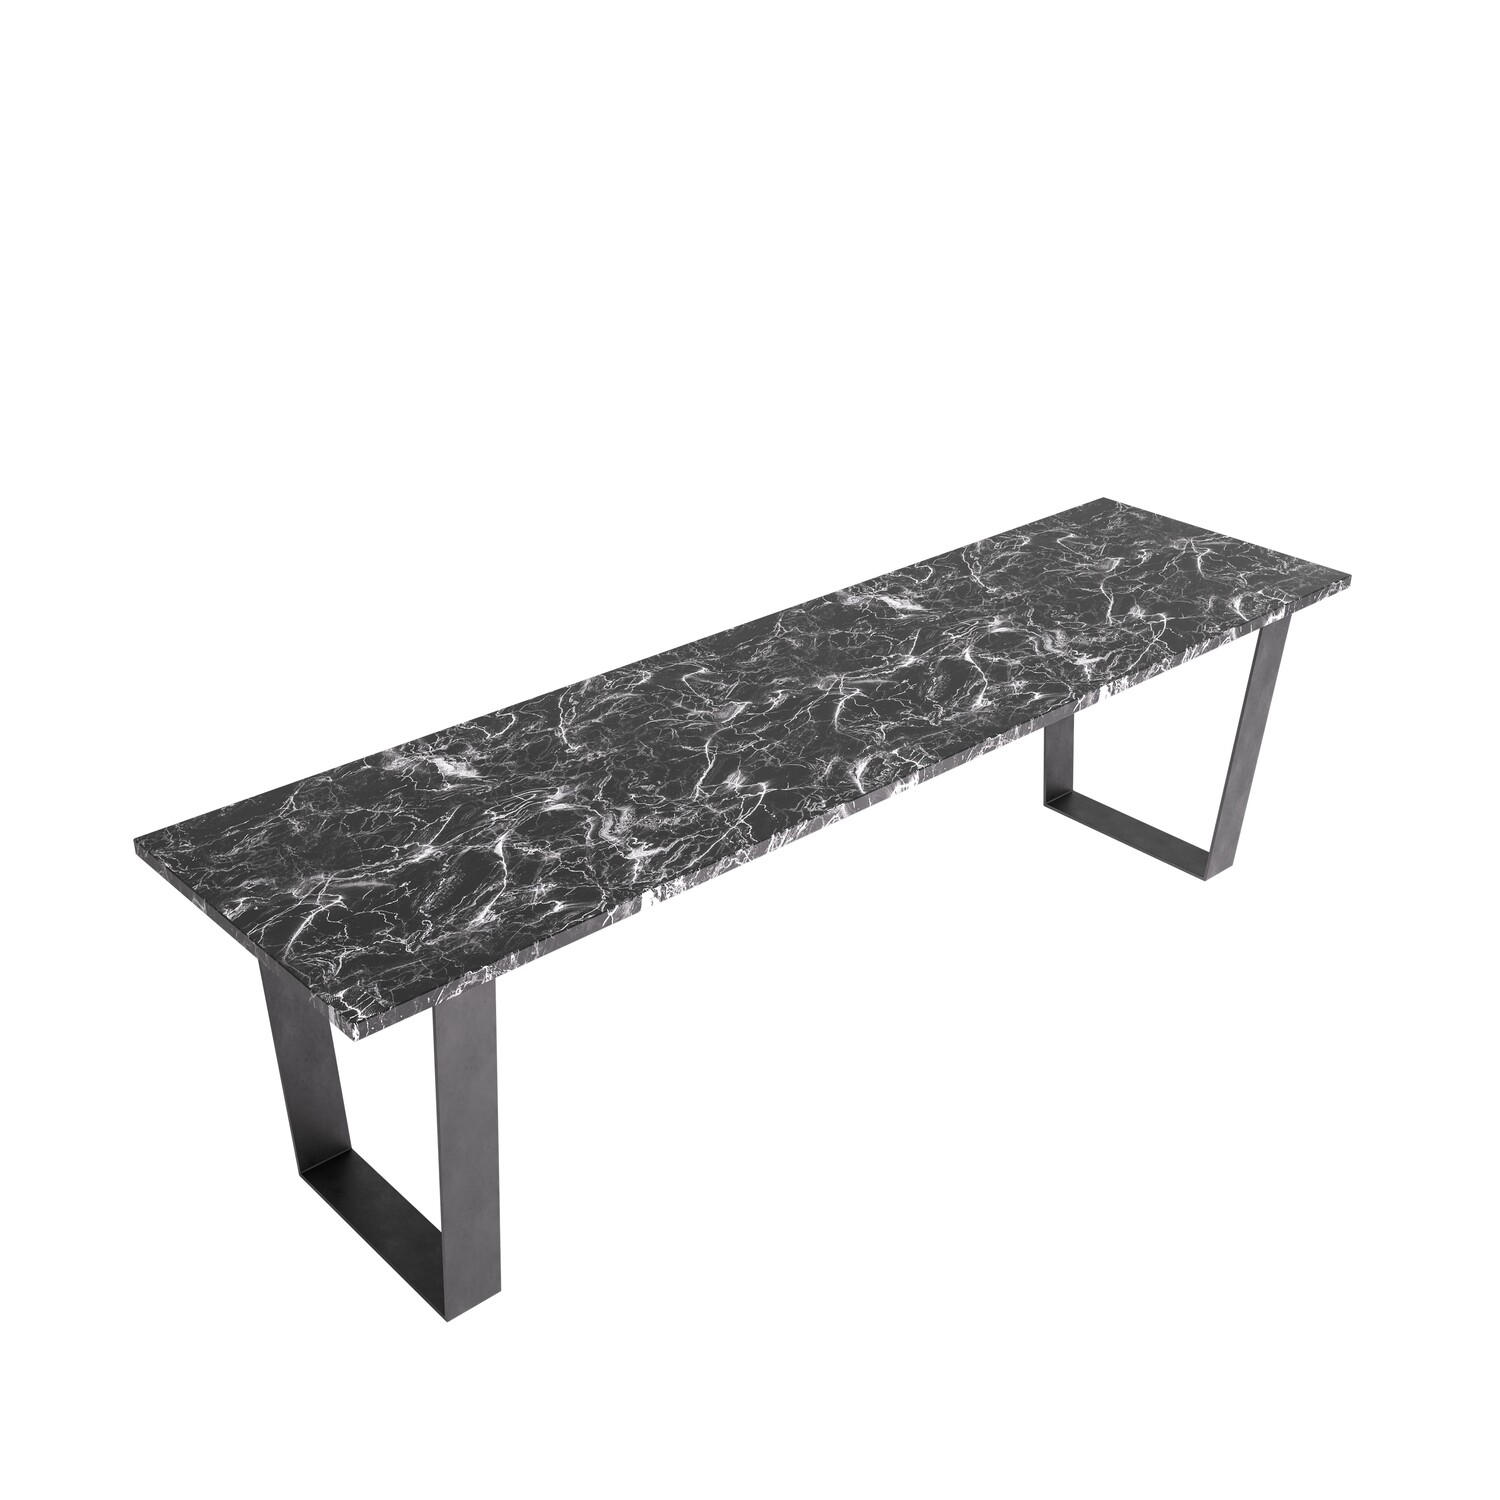 Ivy Black Marble bench